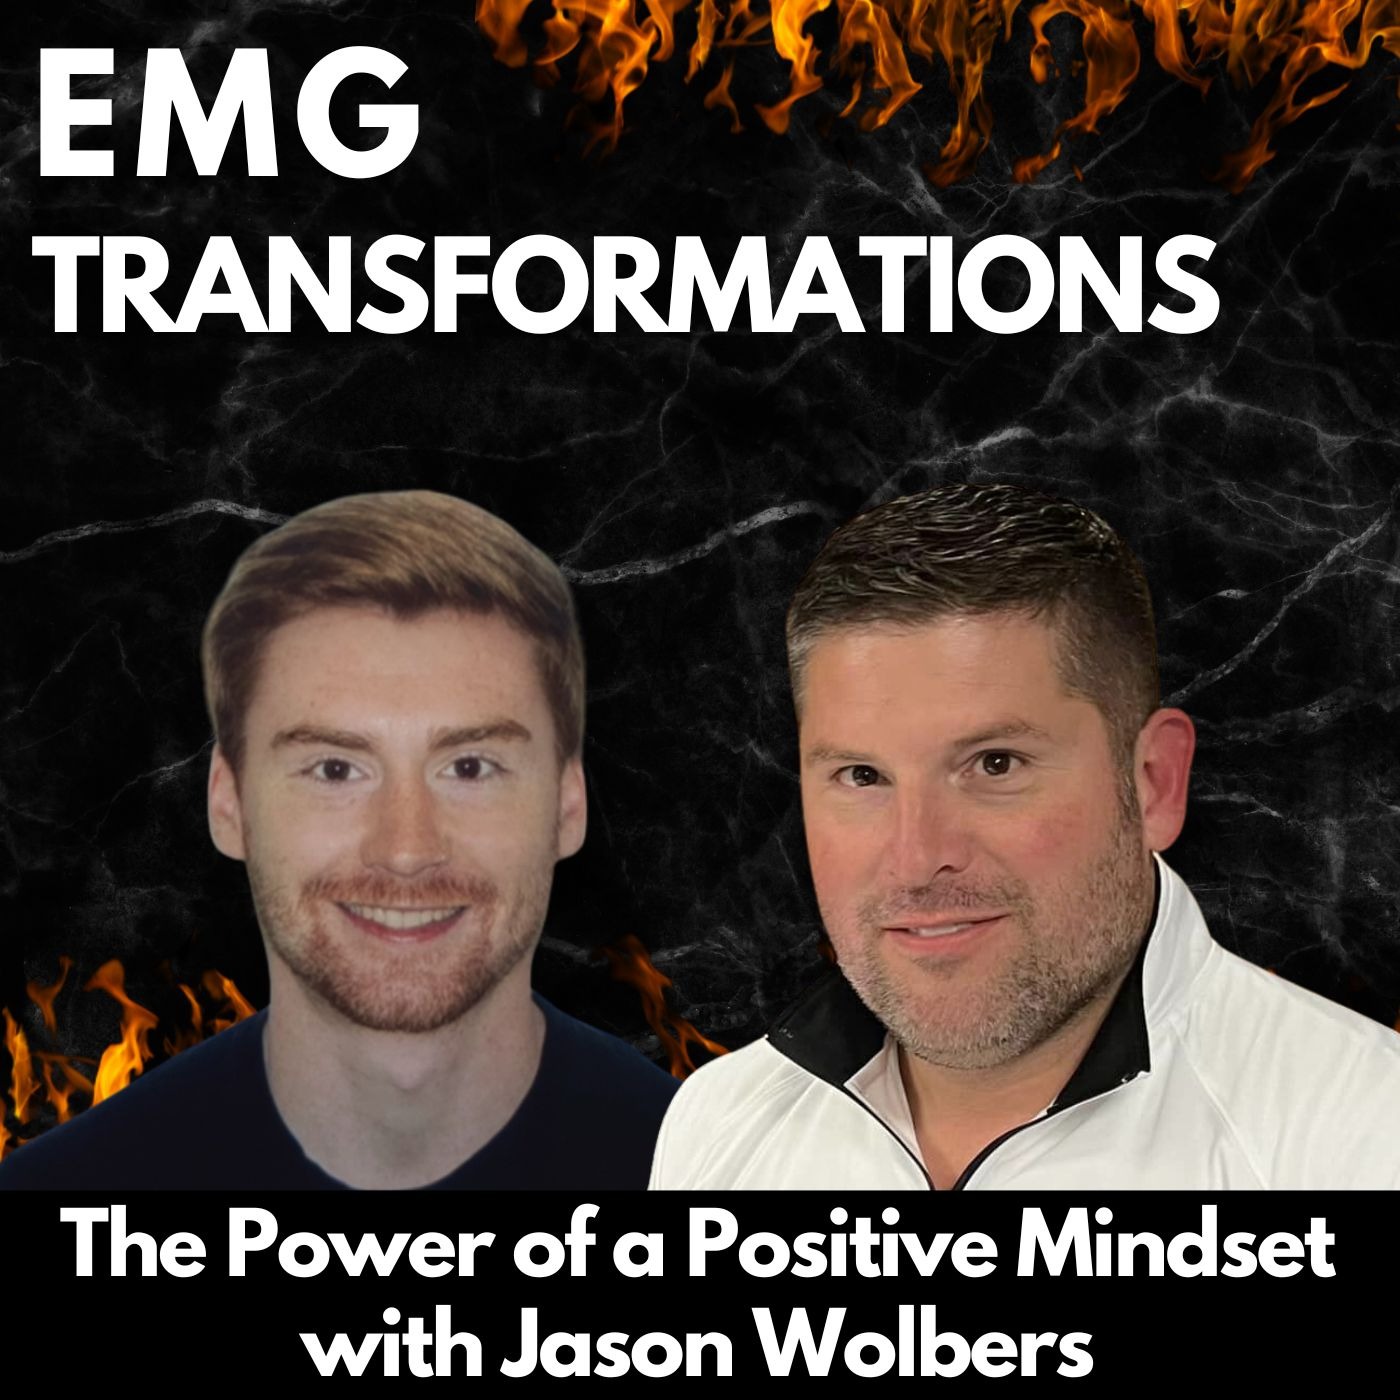 The Power of a Positive Mindset with Jason Wolbers